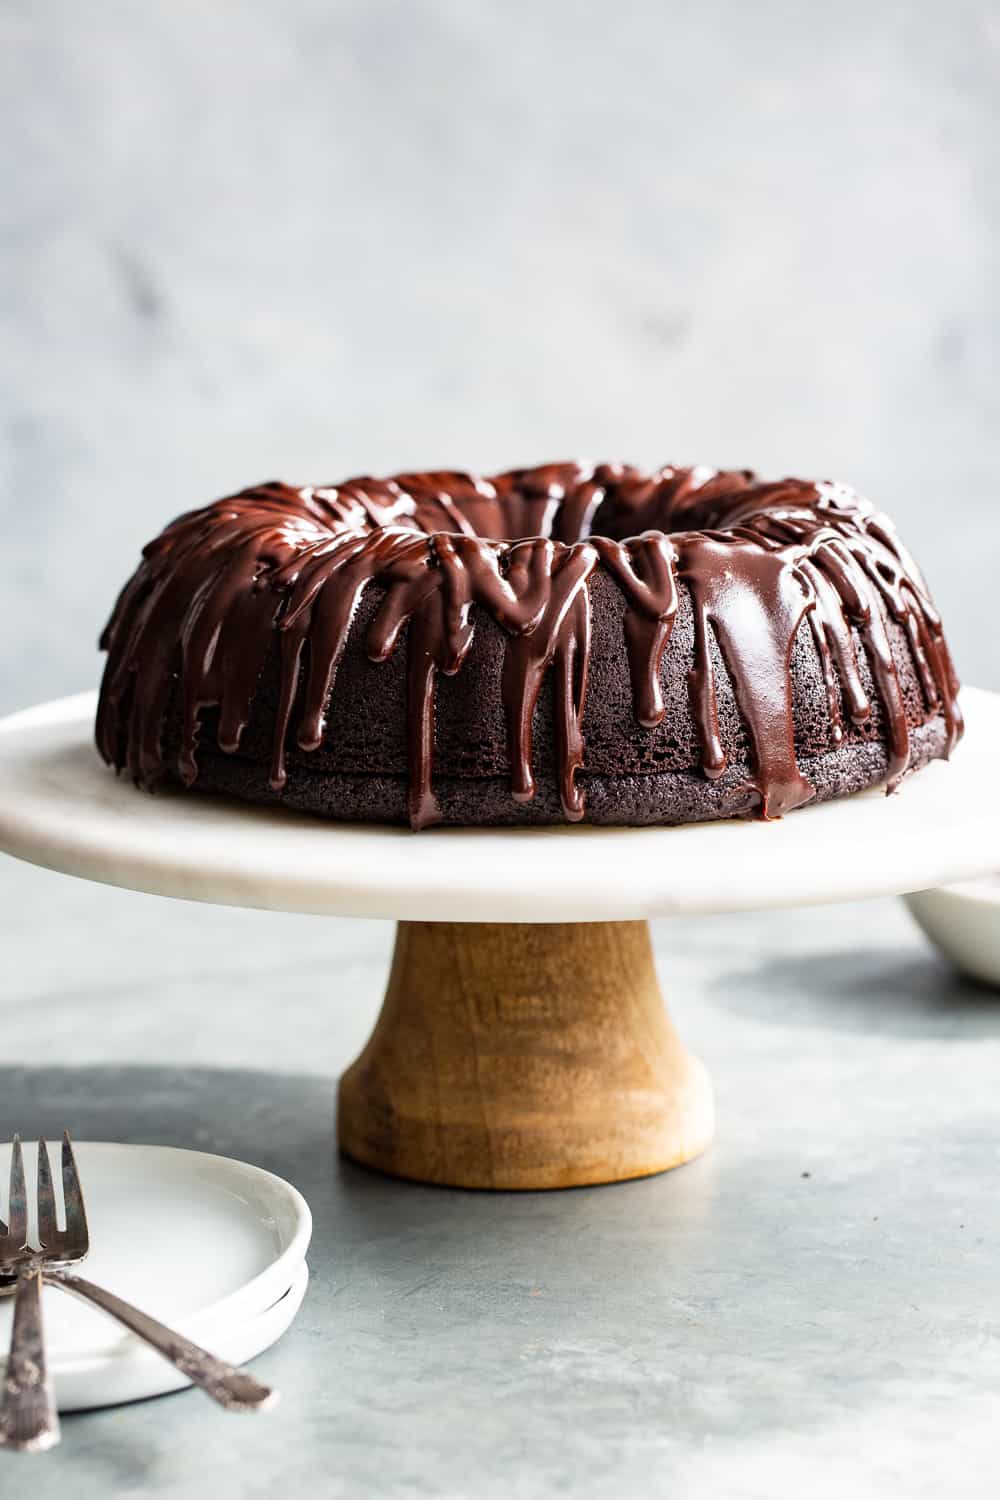 This ultra rich paleo chocolate bundt cake is easier than expected and perfect for any special occasion. A grain free, gluten free and dairy free perfectly moist chocolate cake is topped with an easy dairy free chocolate ganache. Win over any chocolate lover with the first bite! #paleo #grainfree #cleaneating #glutenfree 